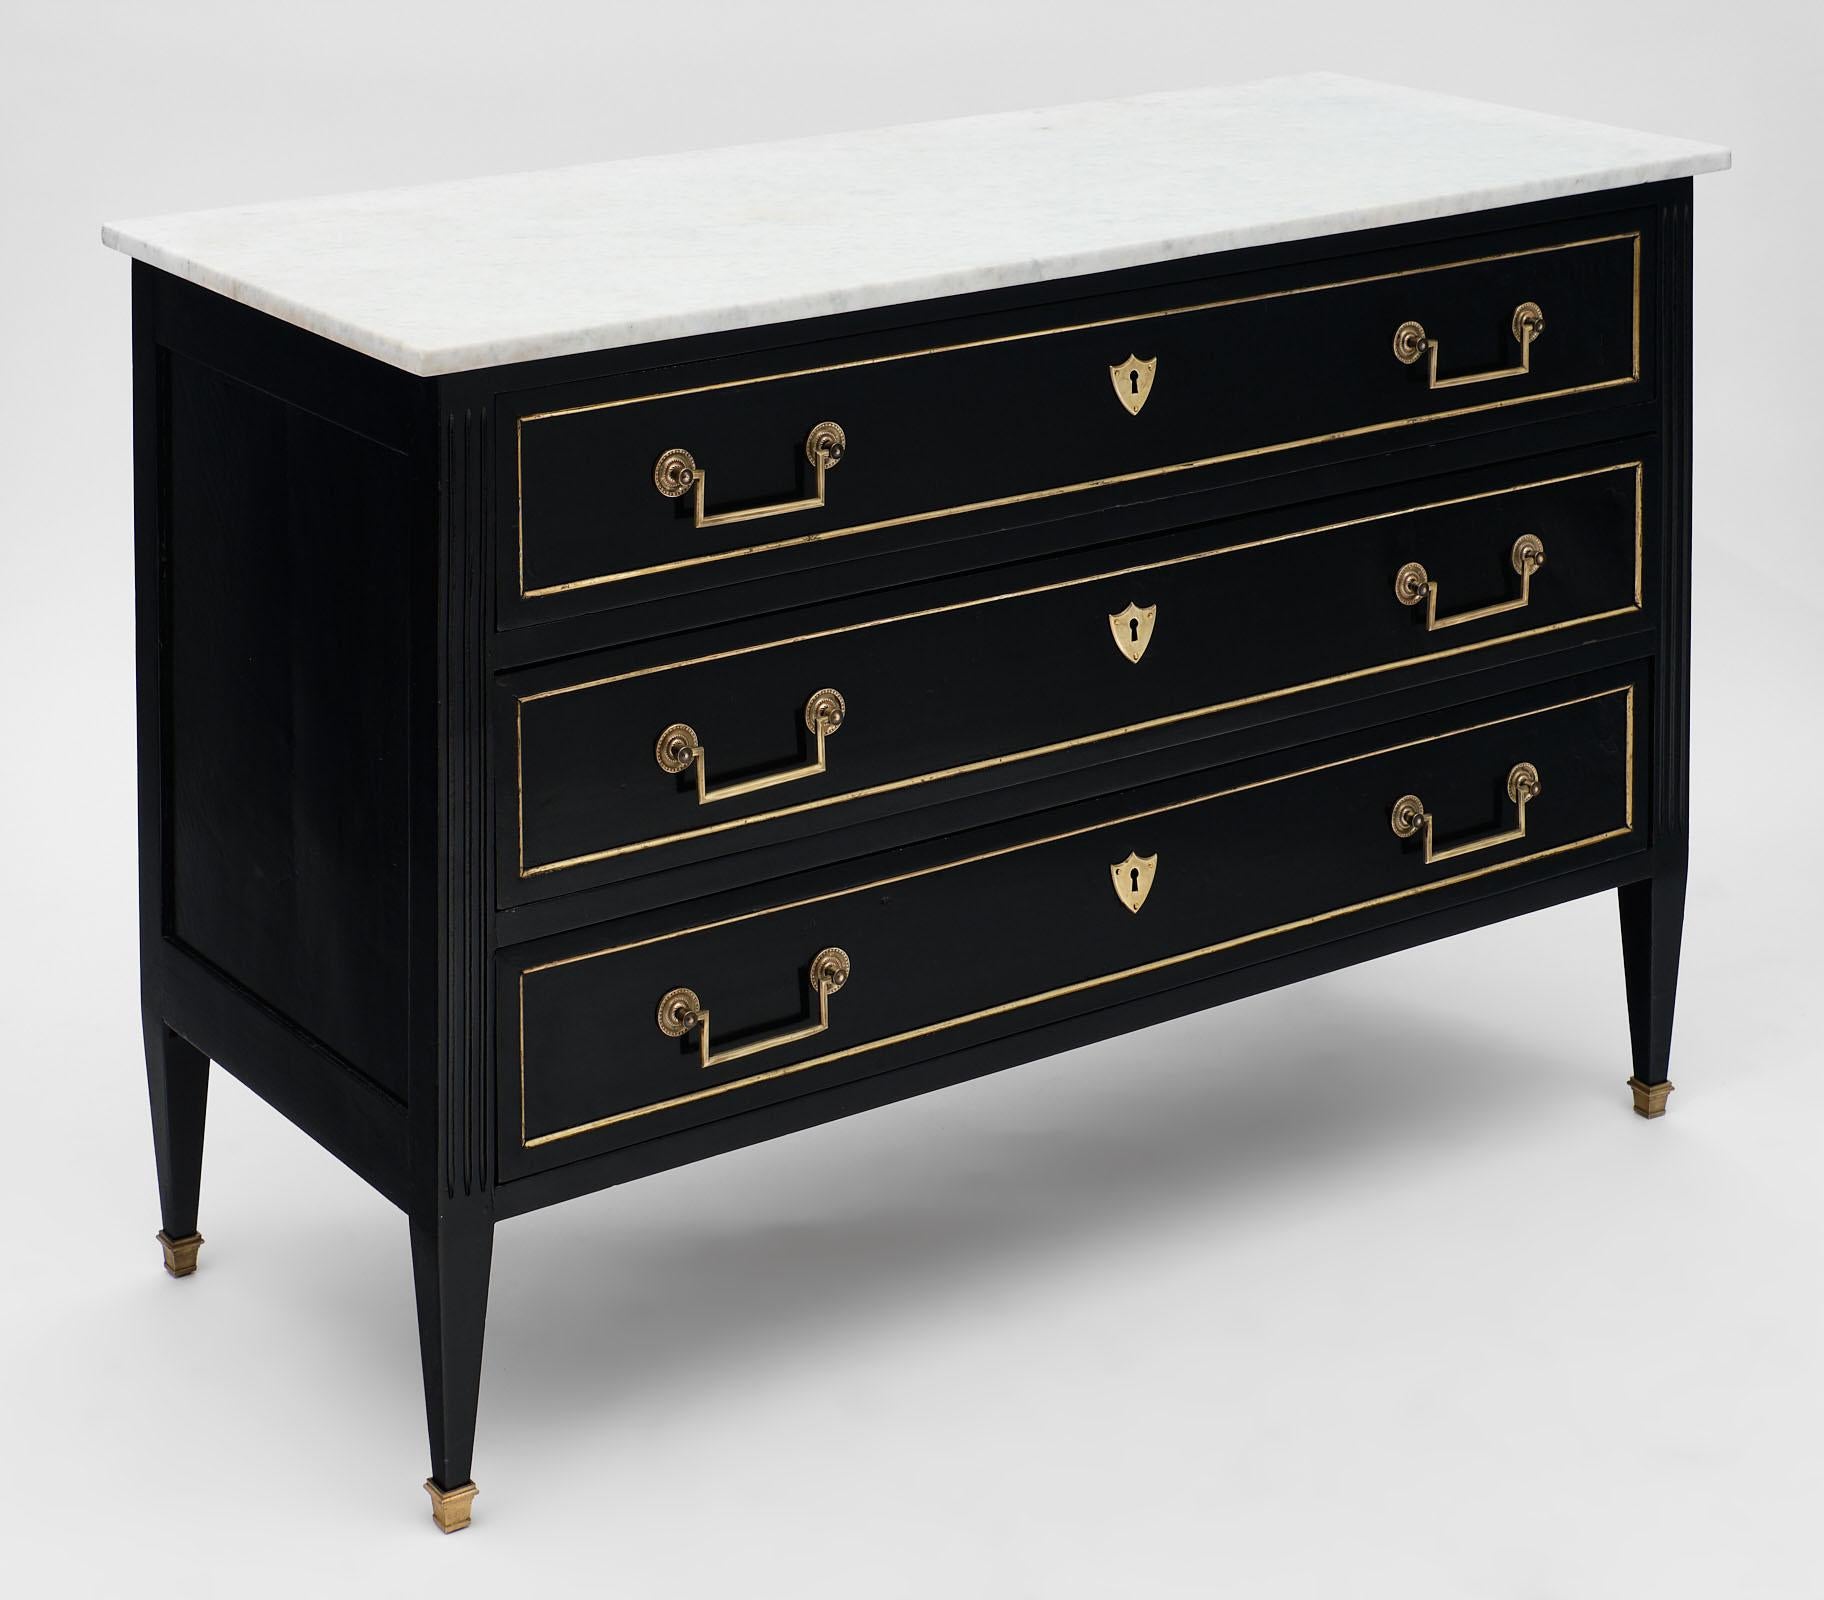 Louis XVI style antique ebonized chest with three dovetailed drawers, gilt brass hardware and trim, and lovely tapered legs. This commode chest features a beautiful Carrara marble slab top and an ebonized finish with French polish for a museum